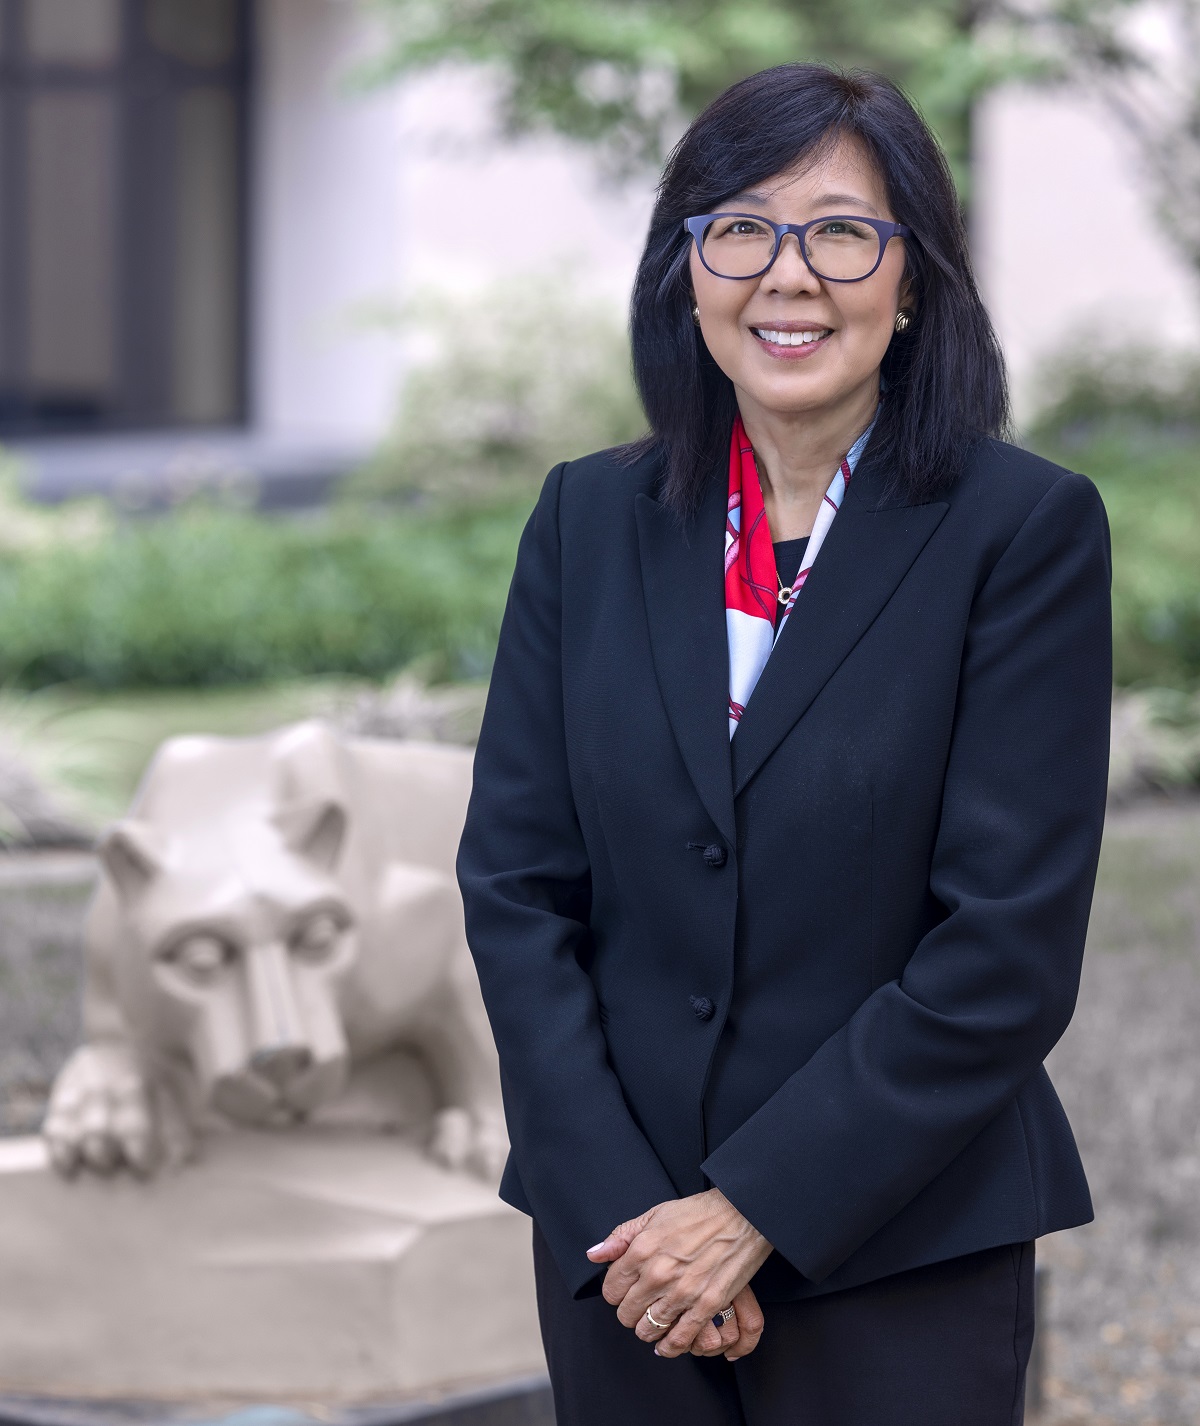 Karen Kim, MD, poses in front of the nittany lion statue in the courtyard outside Penn State College of Medicine.